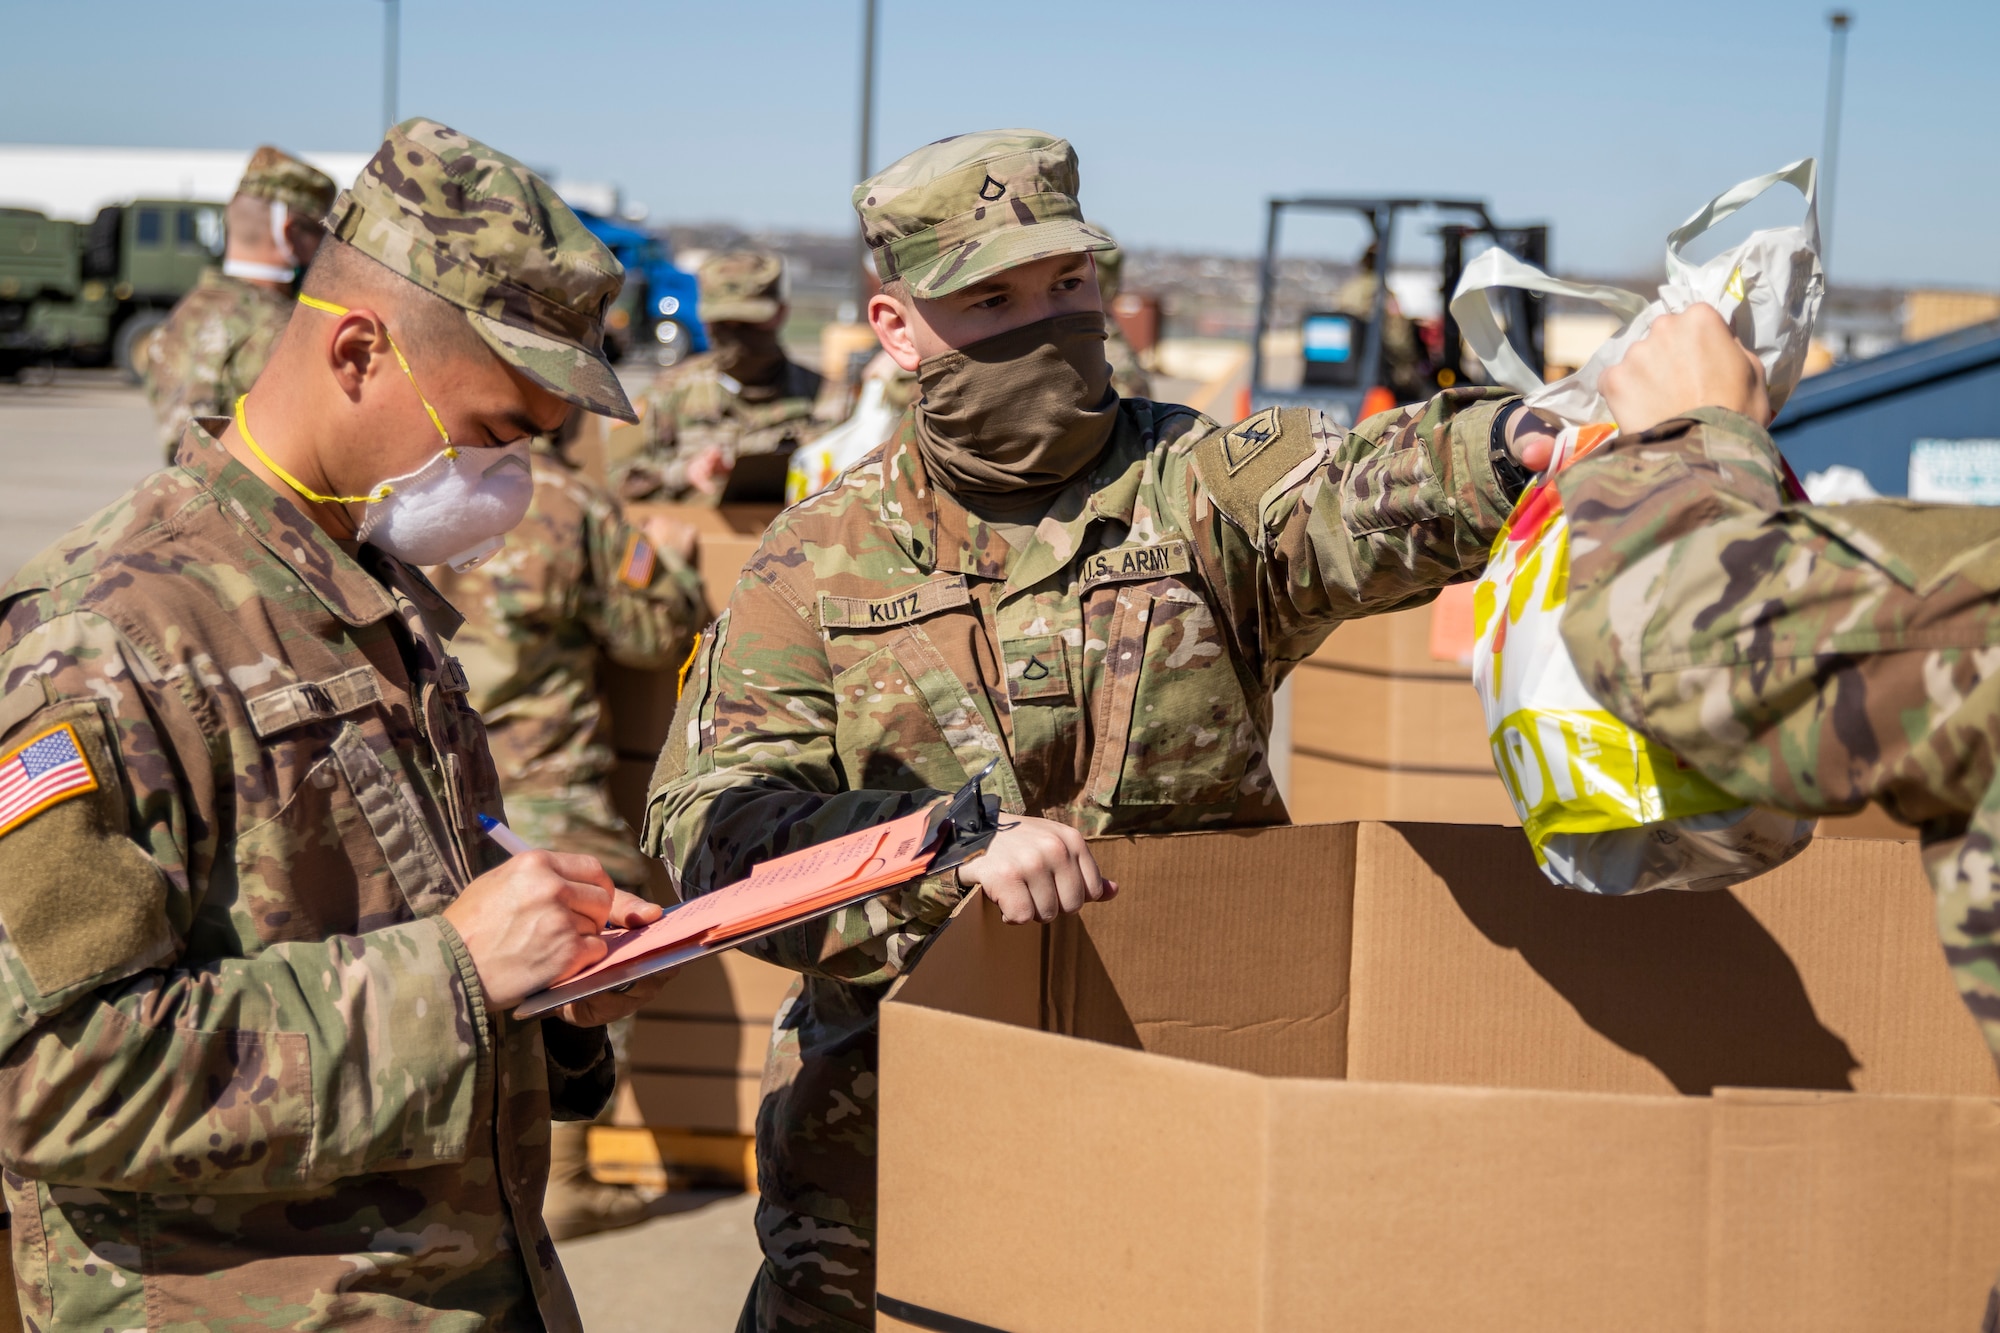 Nebraska Army National Guard Pfc. Nicholas Kutz, 267th Maintenance Company, center, helps pack bags of mostly nonperishable items, April 21, 2020, at the National Guard warehouse in Lincoln, to be distributed to those in need in Southeast Nebraska through the Food Bank of Lincoln. The Nebraska National Guard has supported multiple food bank operations throughout the state during the COVID-19 pandemic.